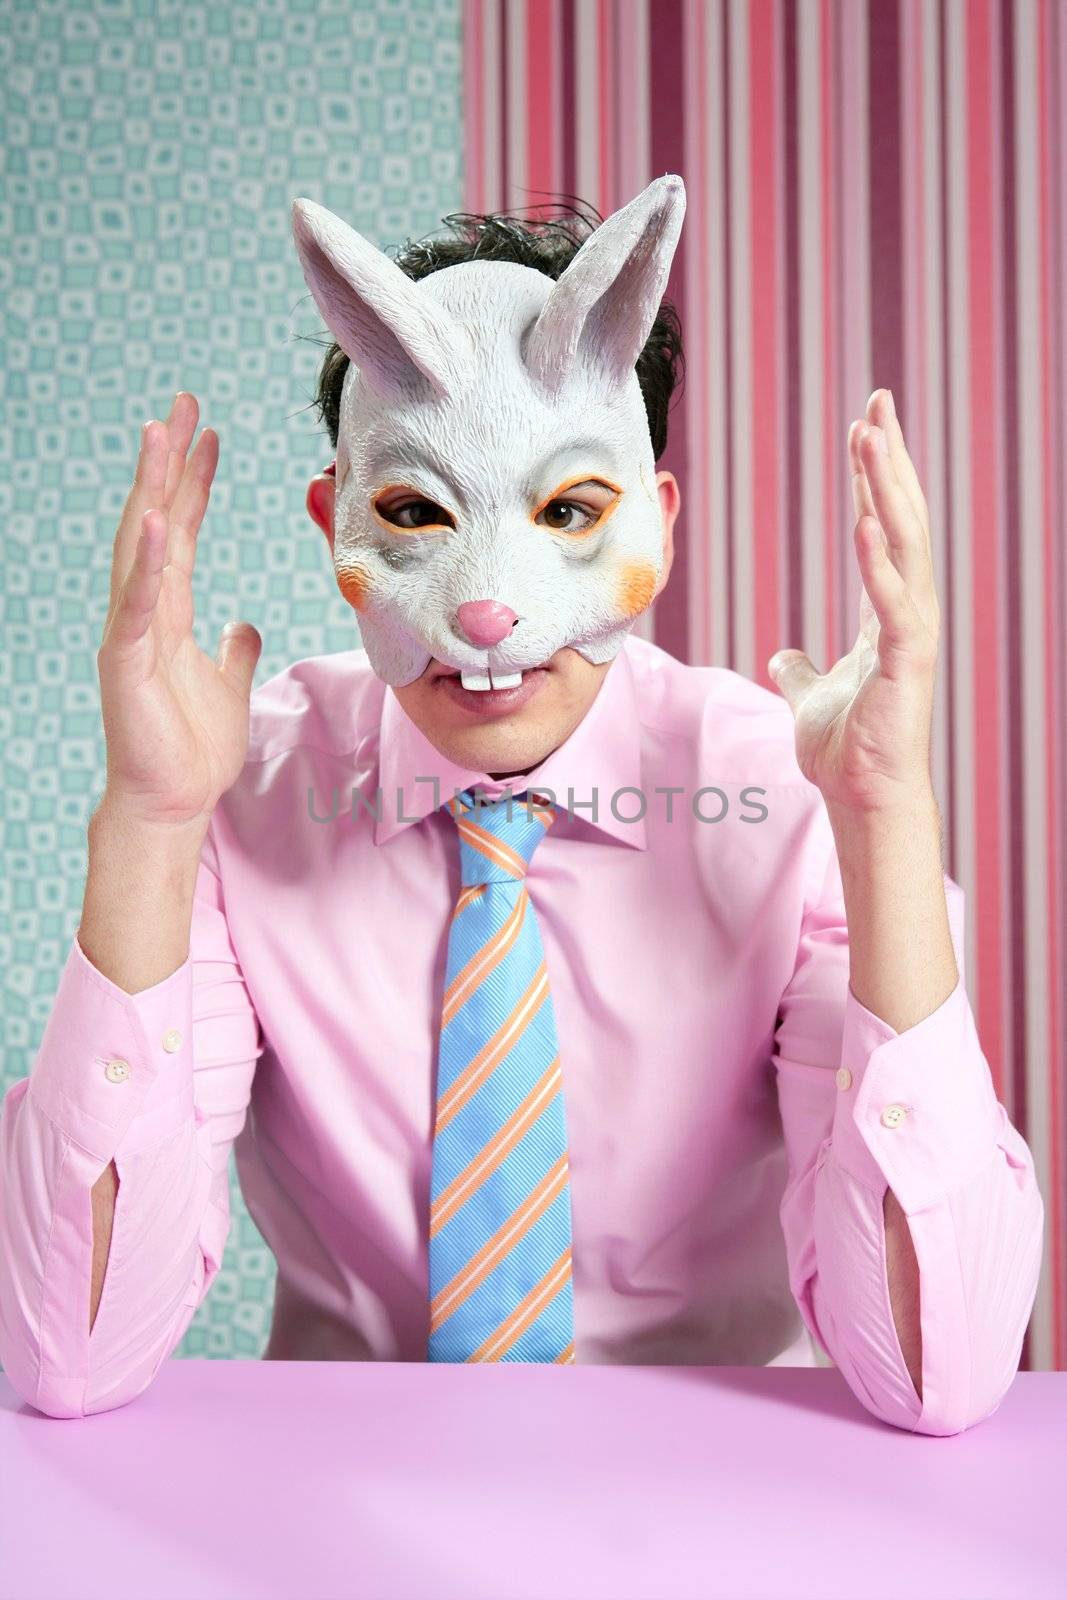 Businessman with funny rabbit mask portrait over wallpaper